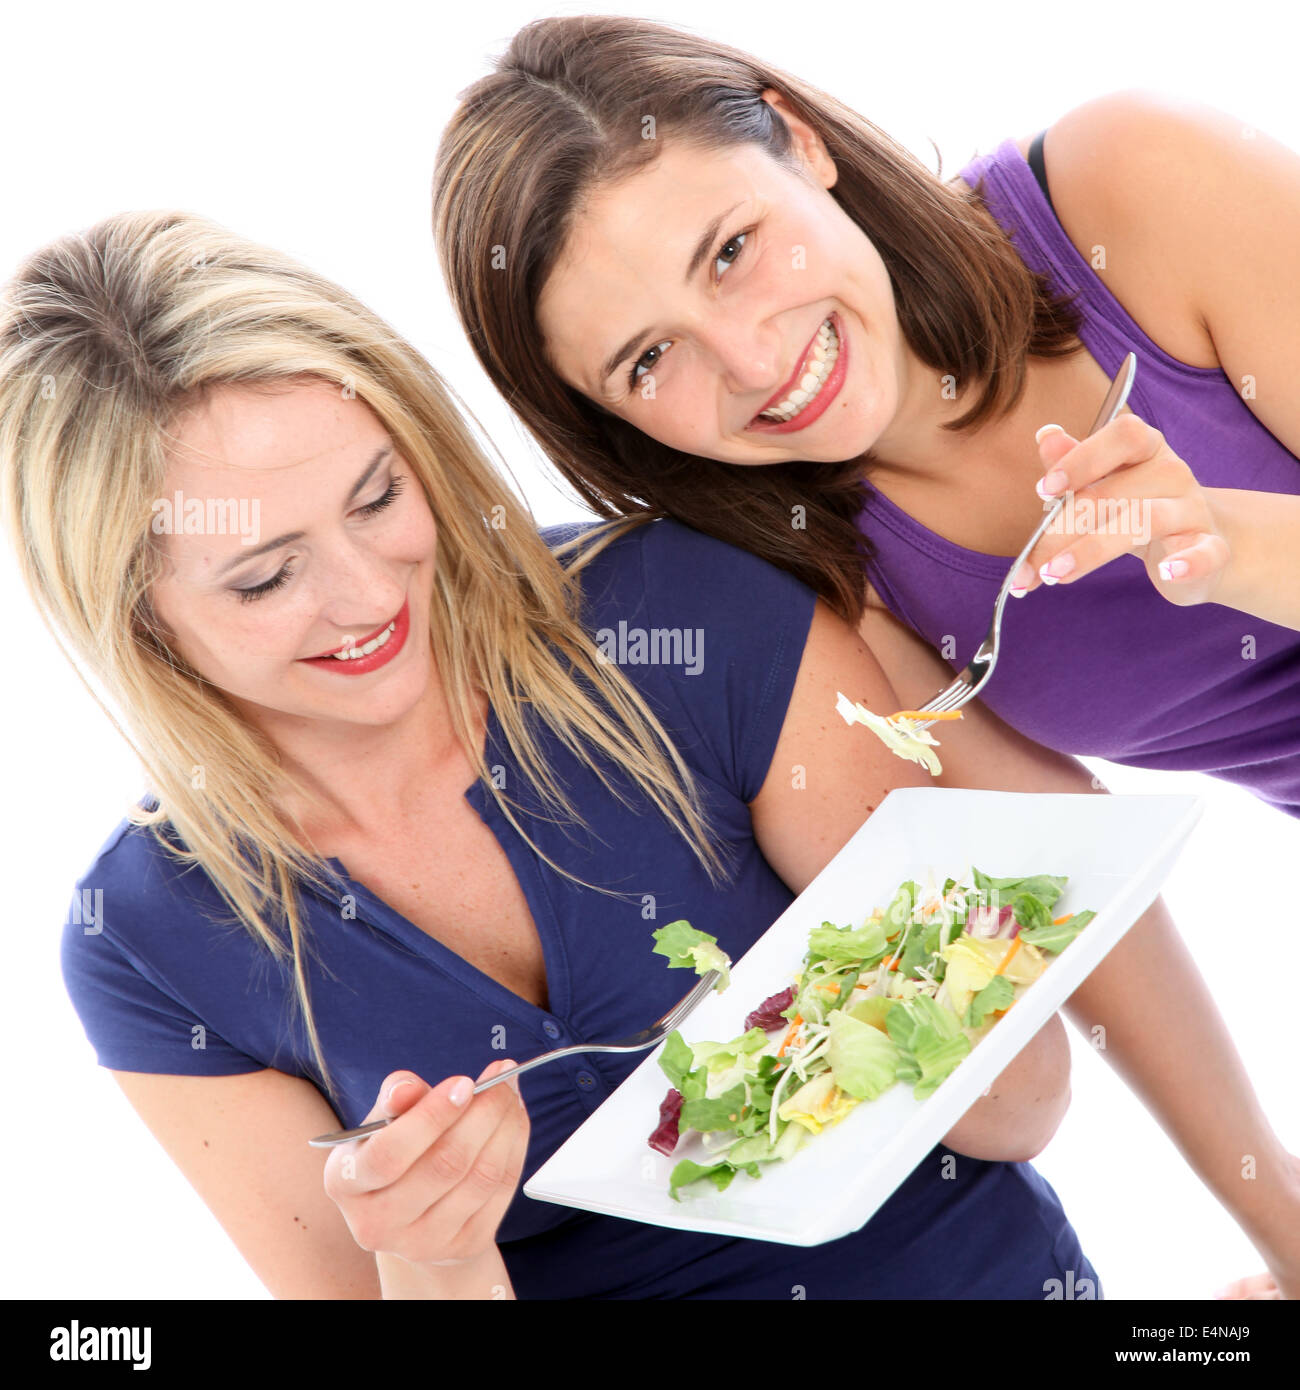 Female friends sharing a plate of salad Stock Photo